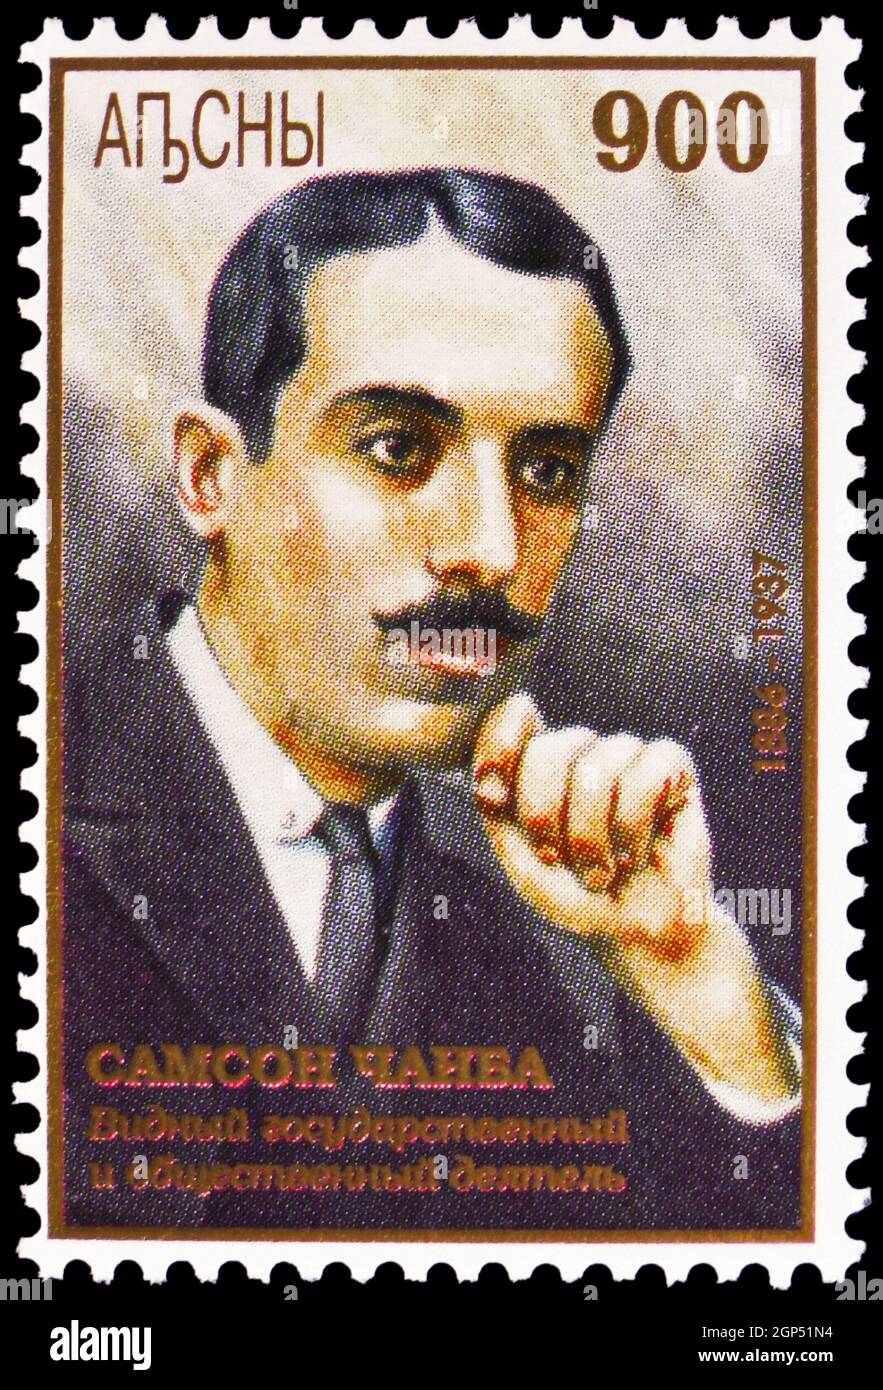 MOSCOW, RUSSIA - AUGUST 5, 2021: Postage stamp printed in Abkhazia shows Samson Chanba, Political Repression serie, circa 1997 Stock Photo